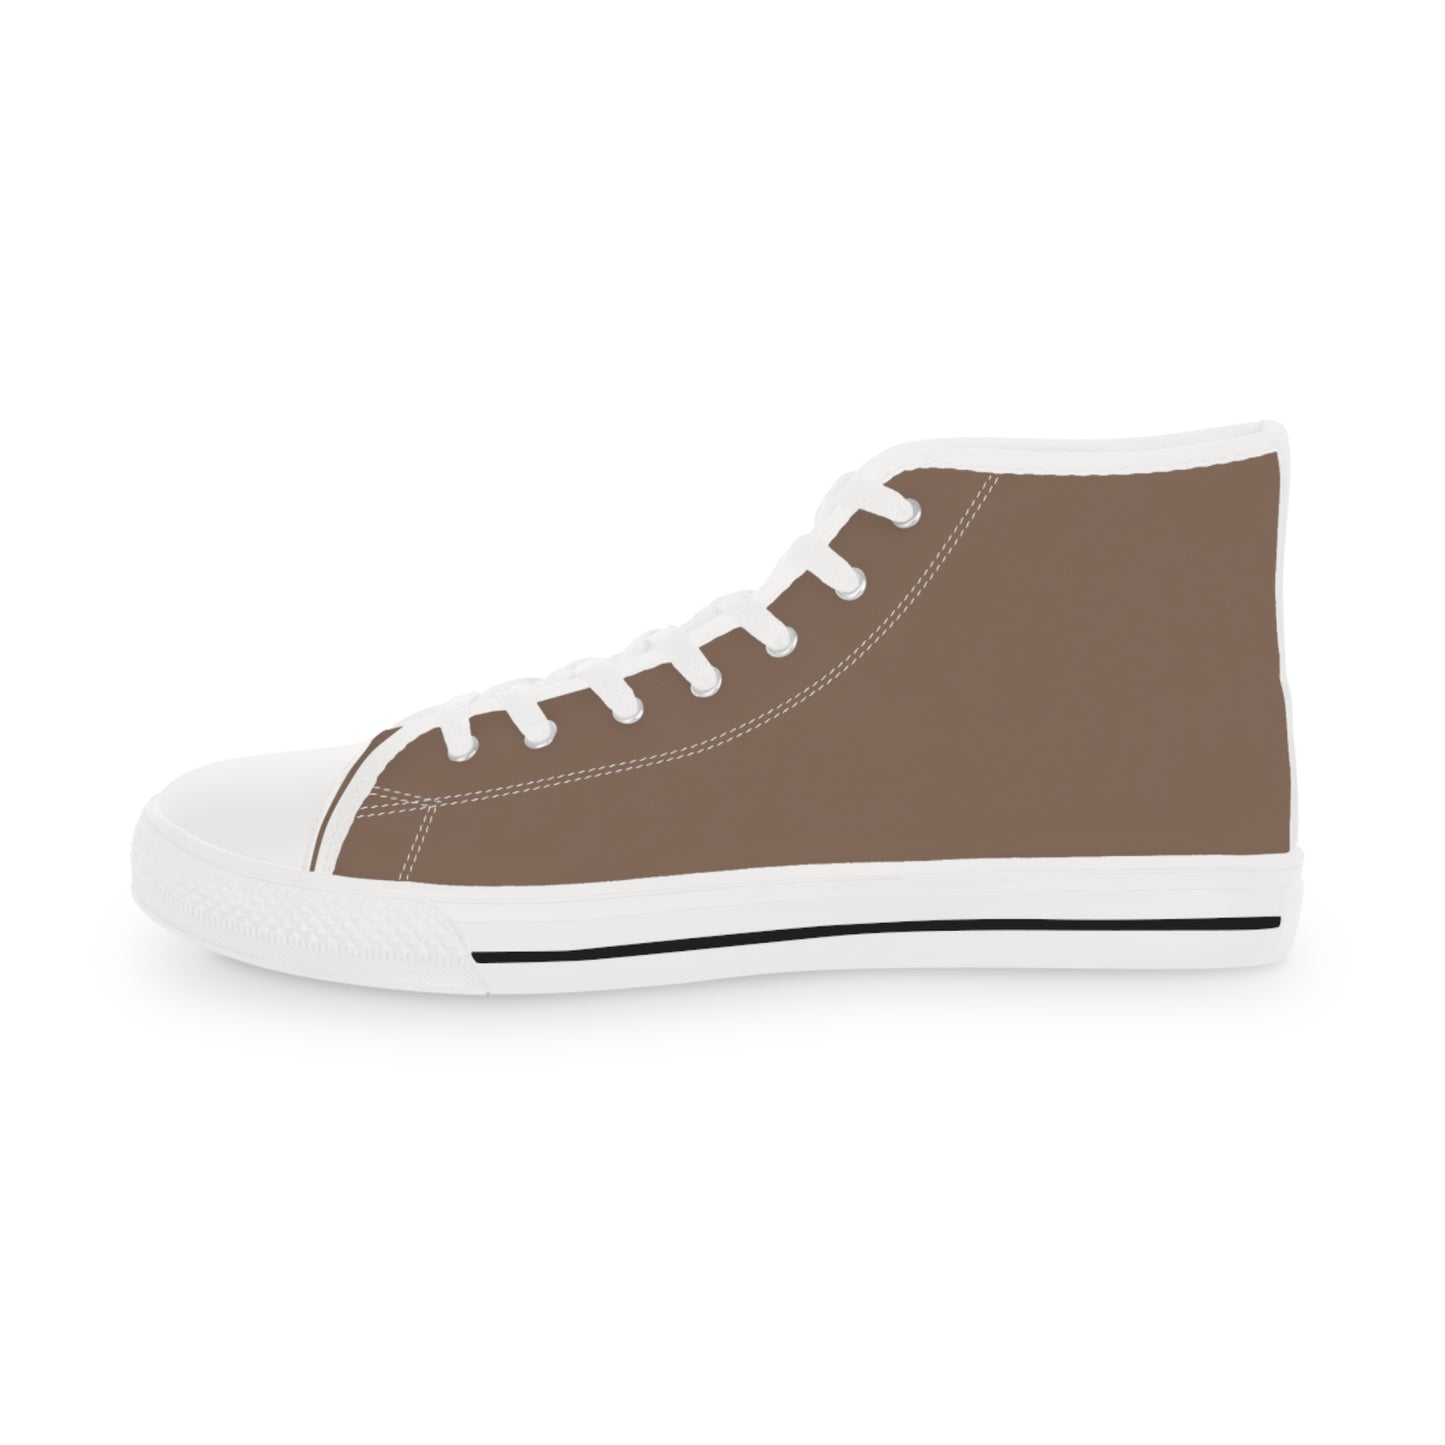 Men's Canvas High Top Solid Color Sneakers - Latte Tan US 14 White sole